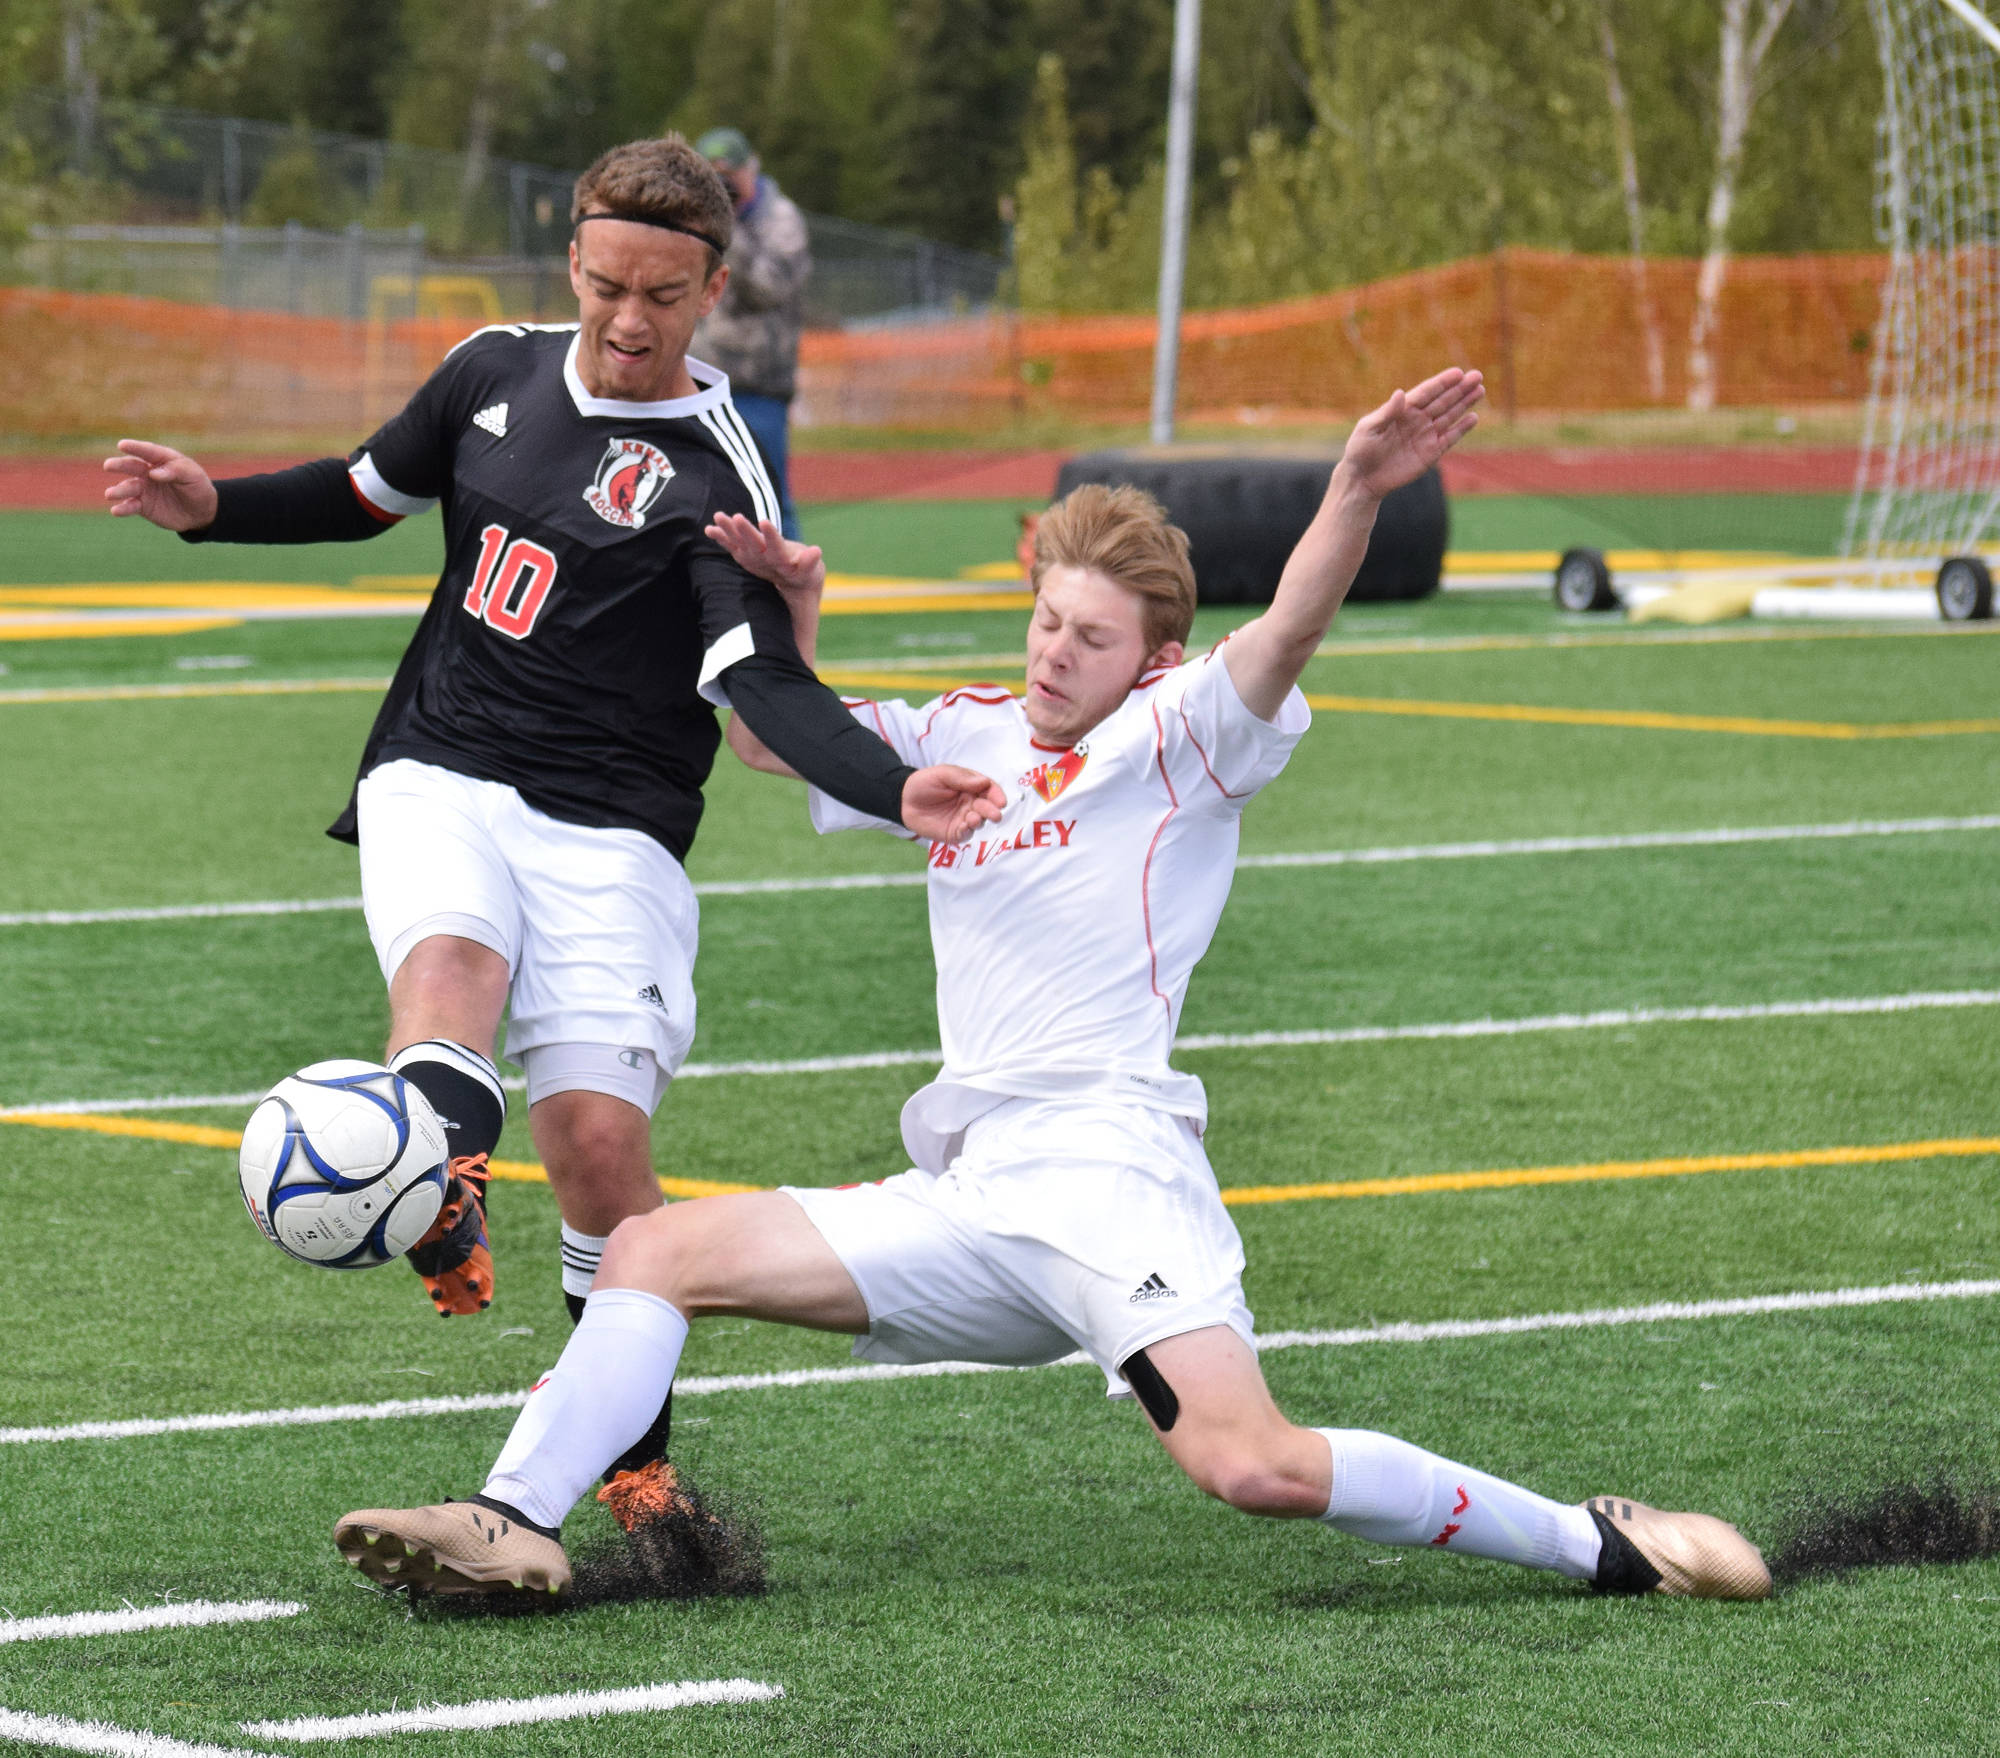 Kenai Central’s Braydon Goodman (10) fights for a loose ball against West Valley’s Shane Gillette in Friday’s state tournament semifinal matchup at Service High School. (Photo by Joey Klecka/Peninsula Clarion)